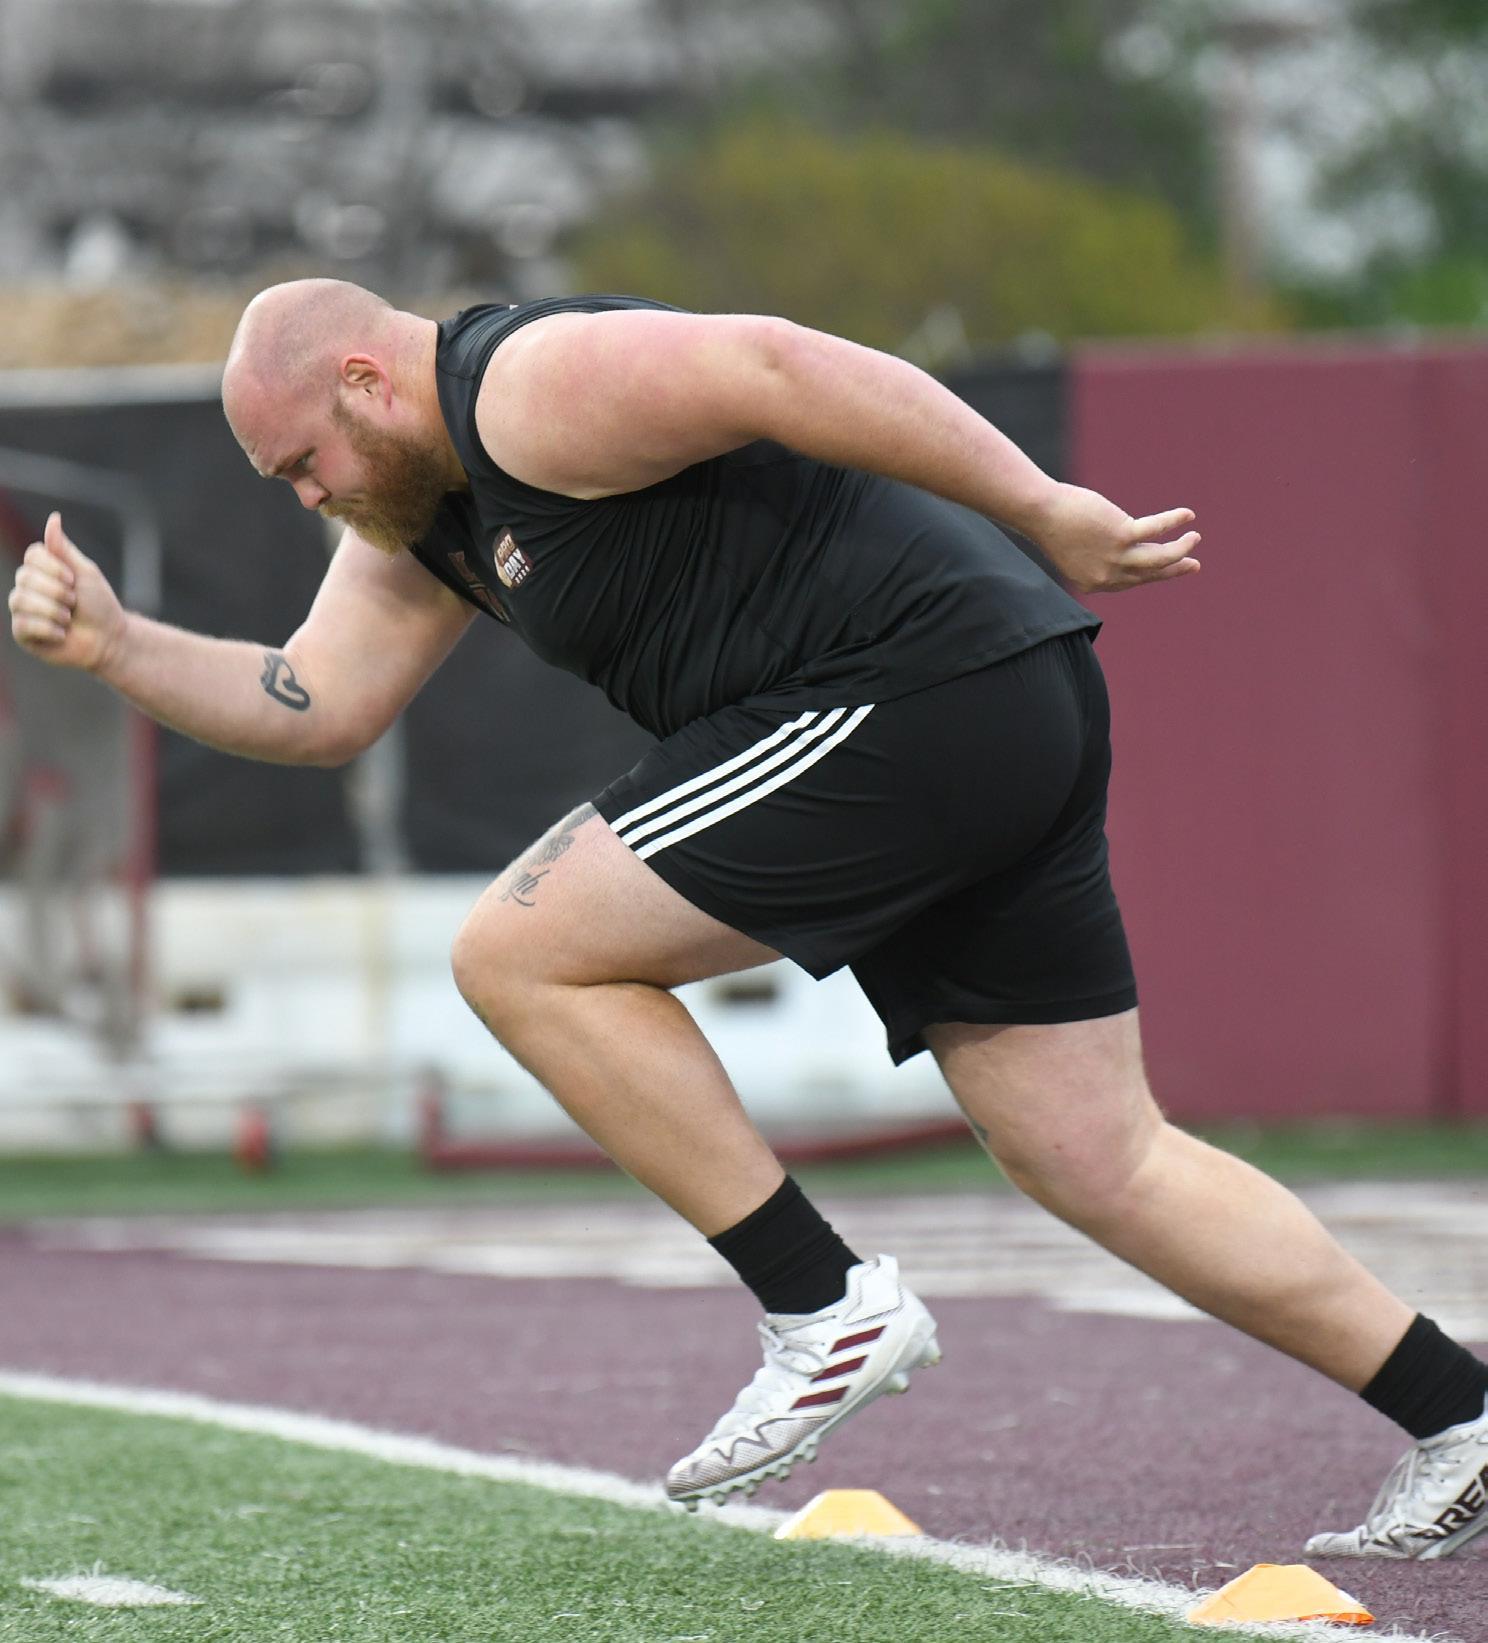 Bobcats show off their skills at TXST Pro Day